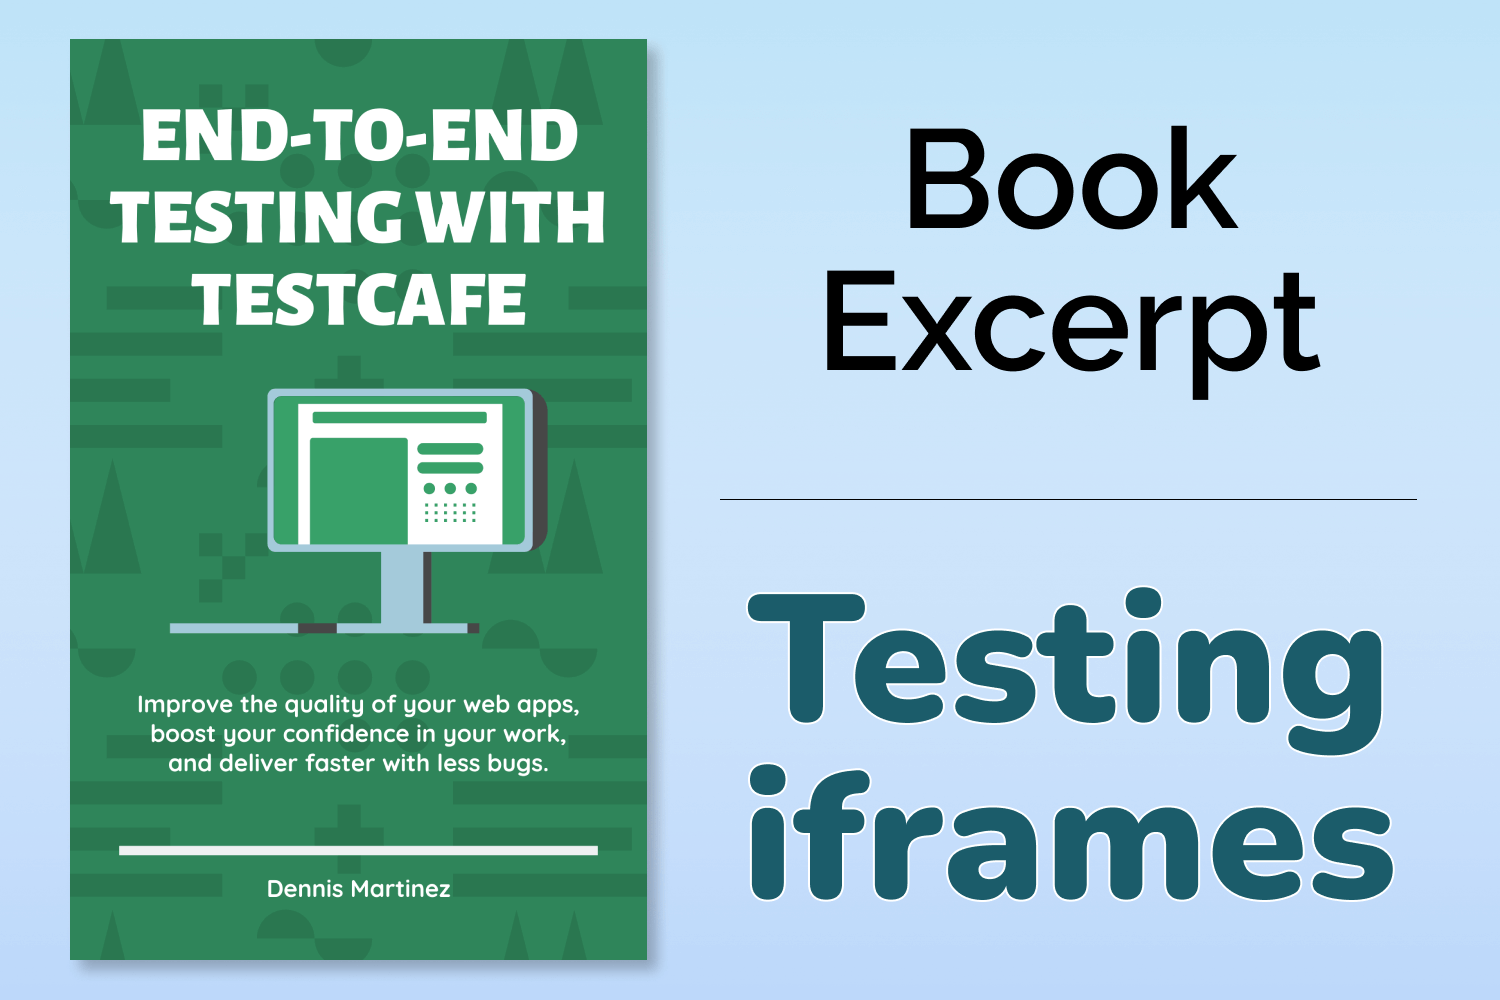 End-to-End Testing with TestCafe Book Excerpt: Testing iframes